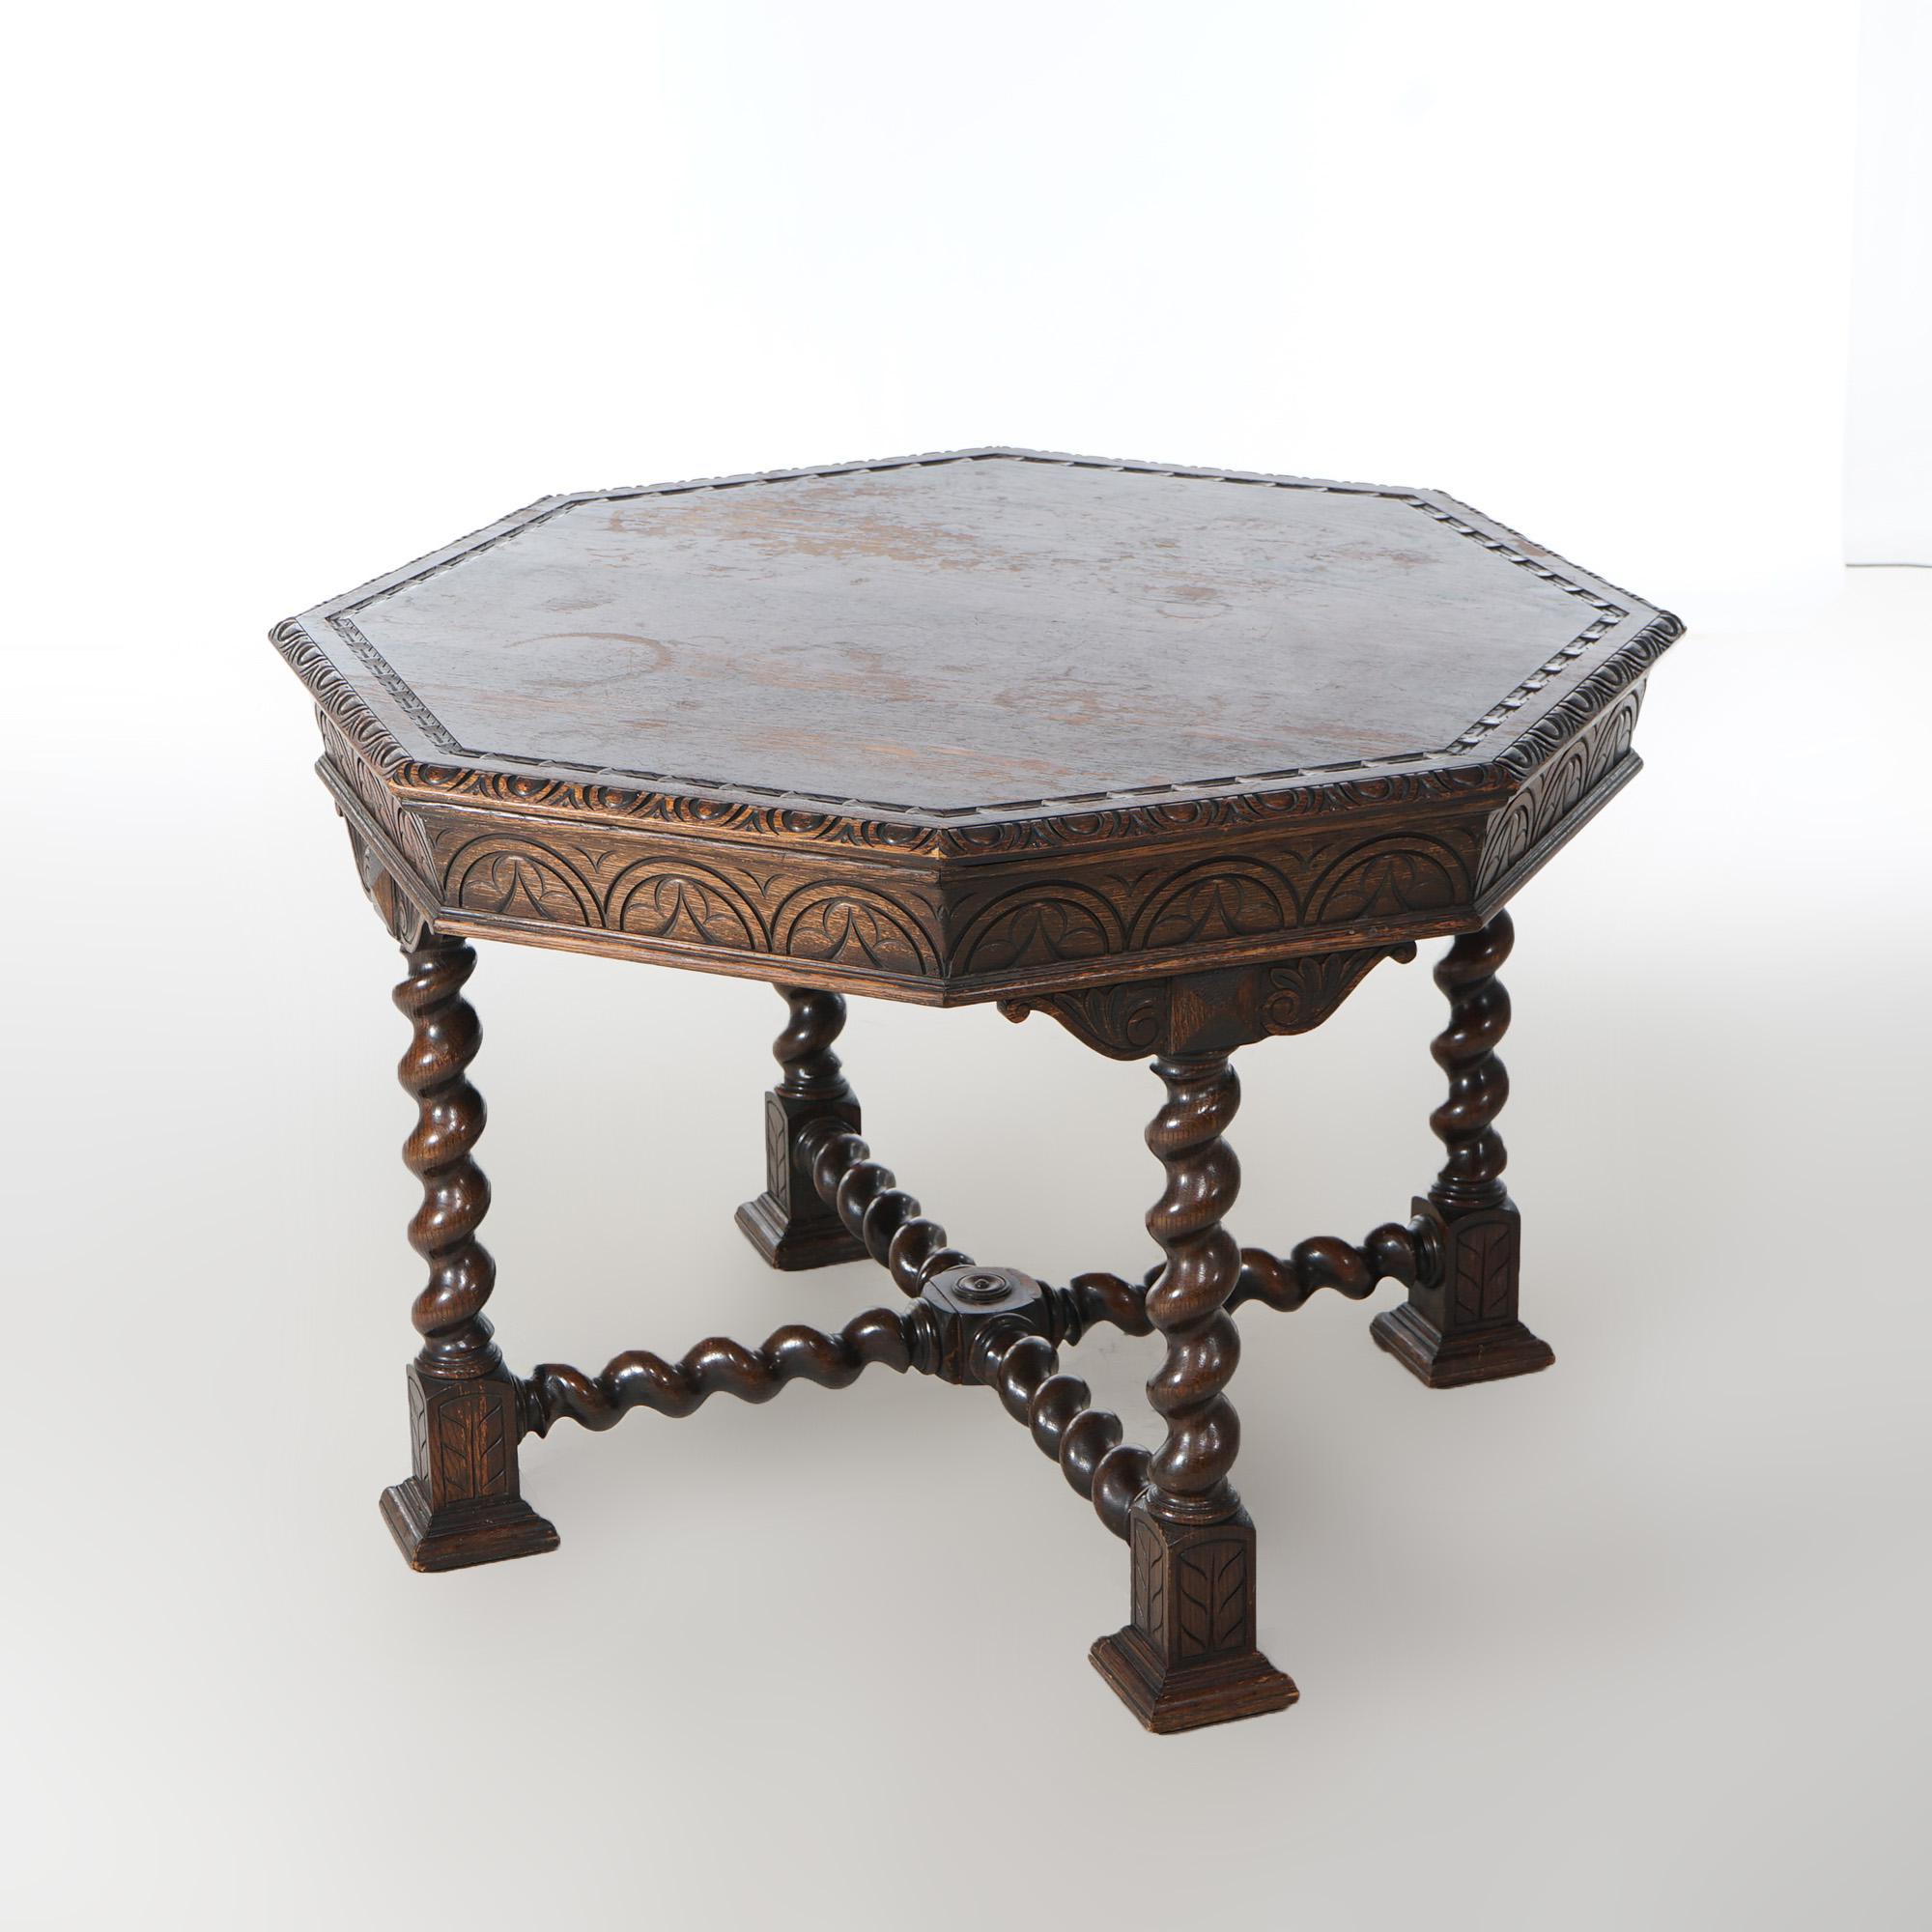 Antique Edwardian Oversized Carved Oak Octagonal Center Table with Rope Twist Legs & Stretchers, C1910

Measures- 30.5